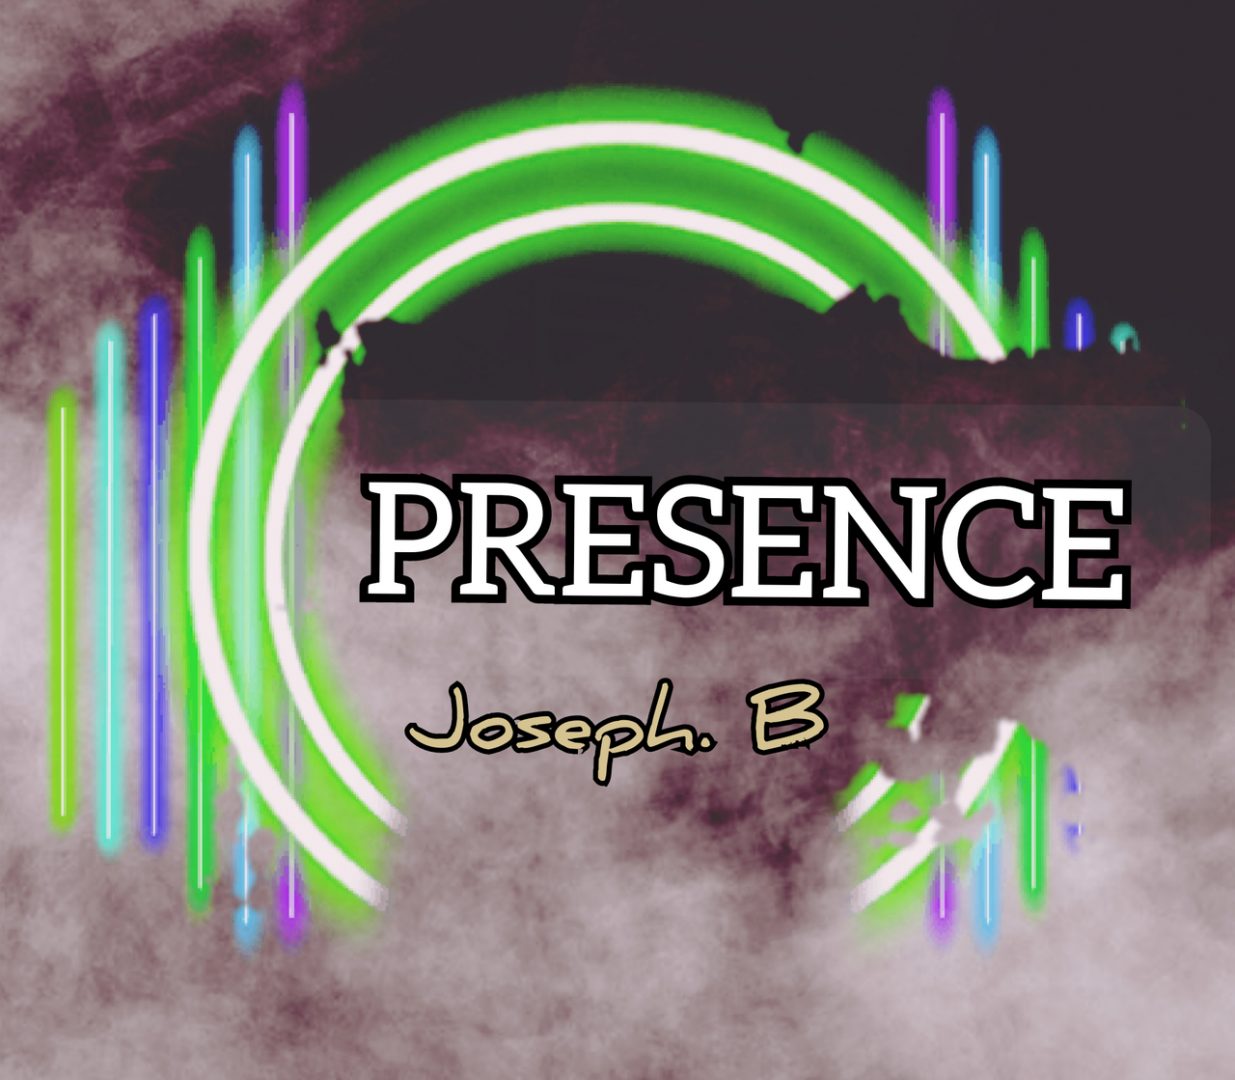 Presence - Ghost CAAN by Joseph B (MP4 Video Download)